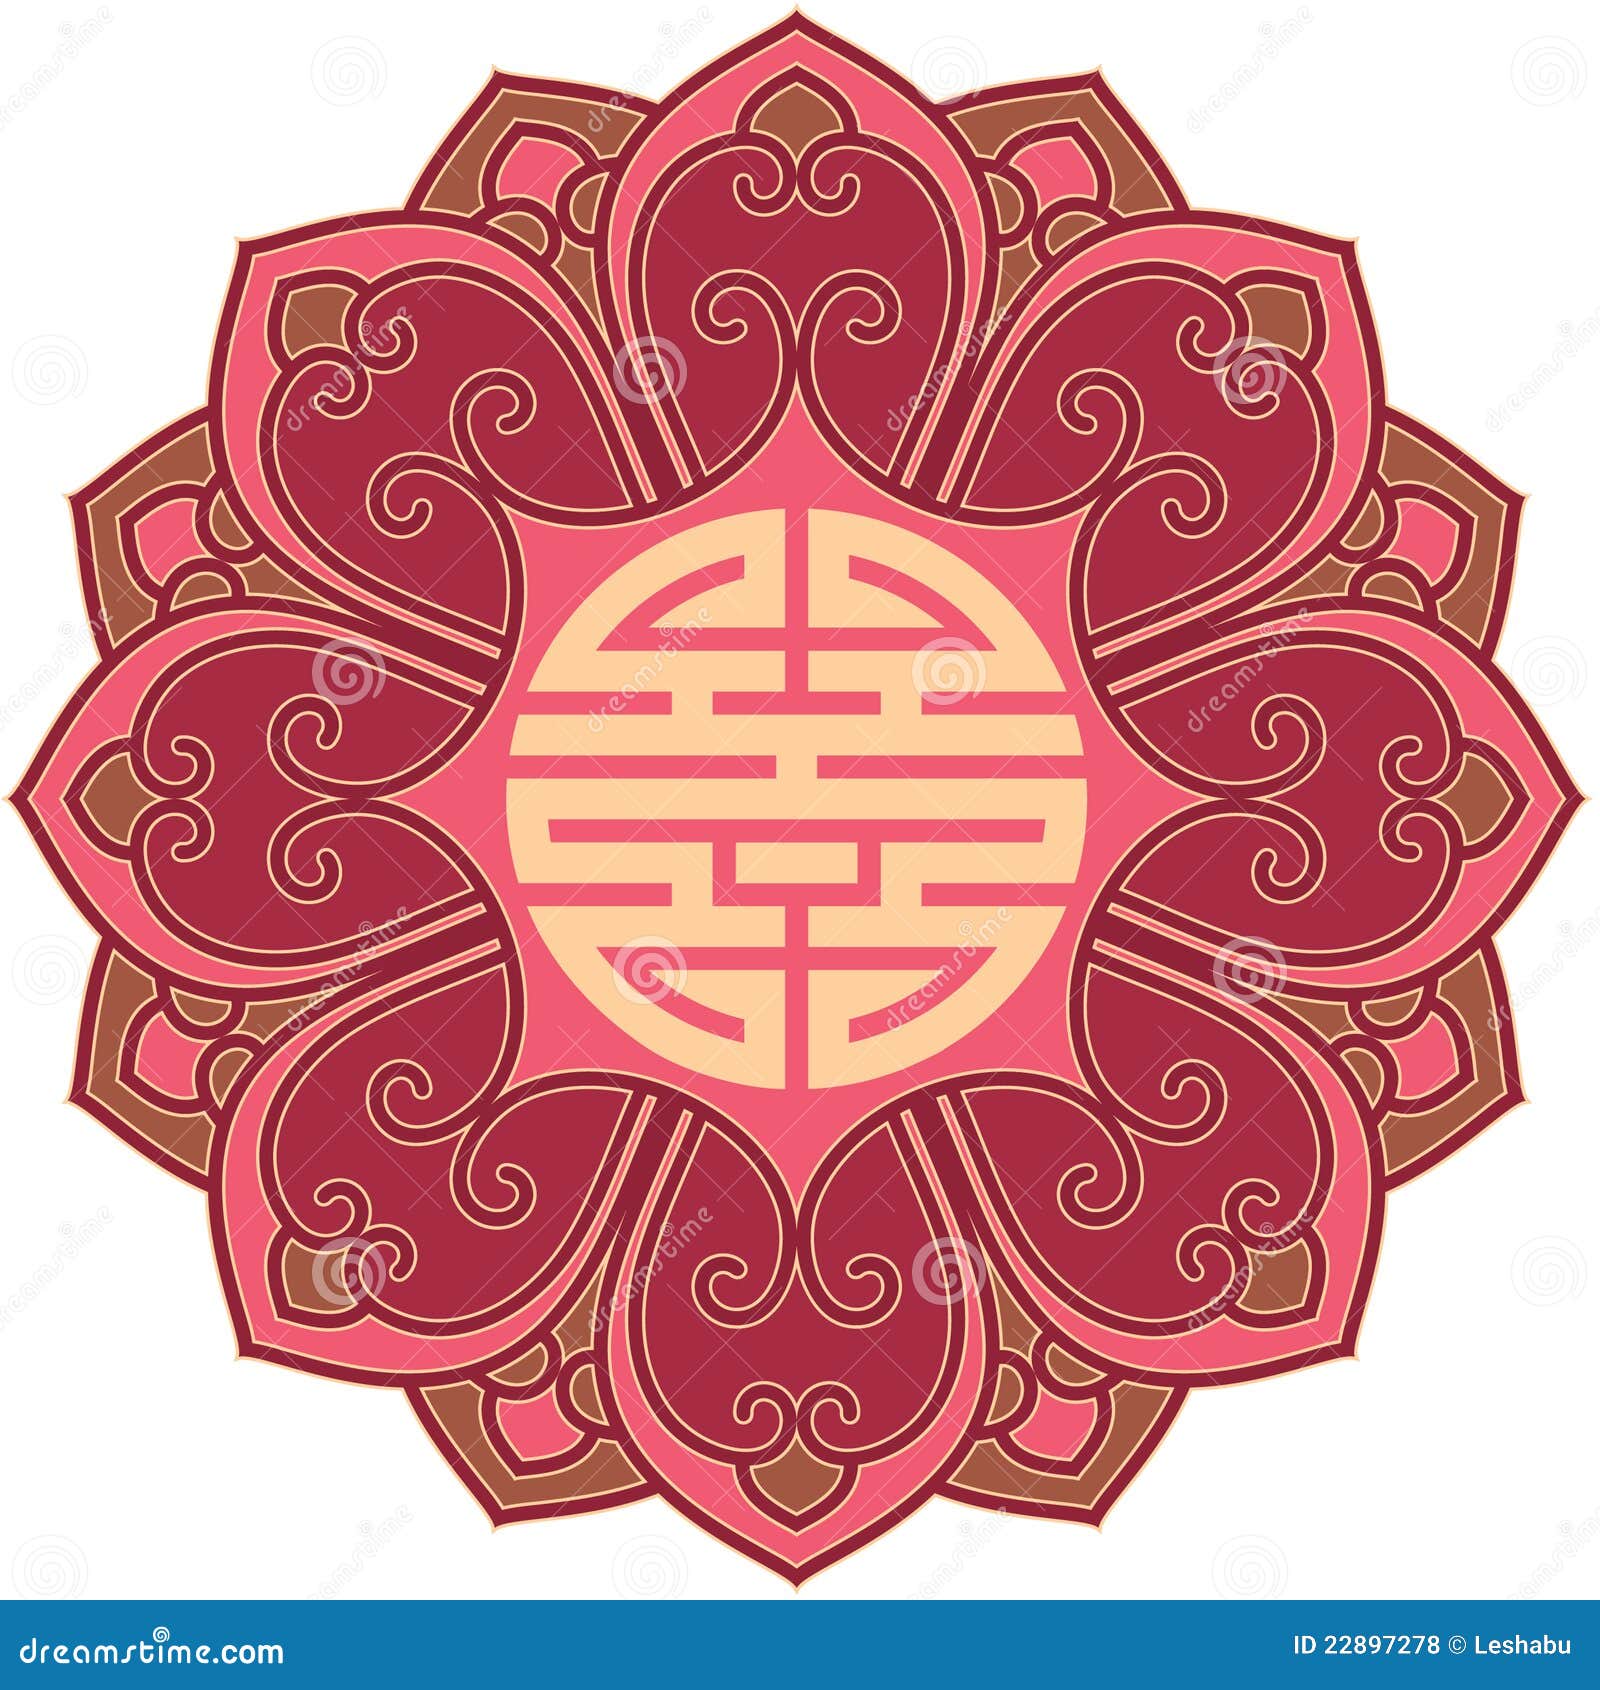 Chinese Flower Design Element Royalty Free Stock Photos - Image: 22897278